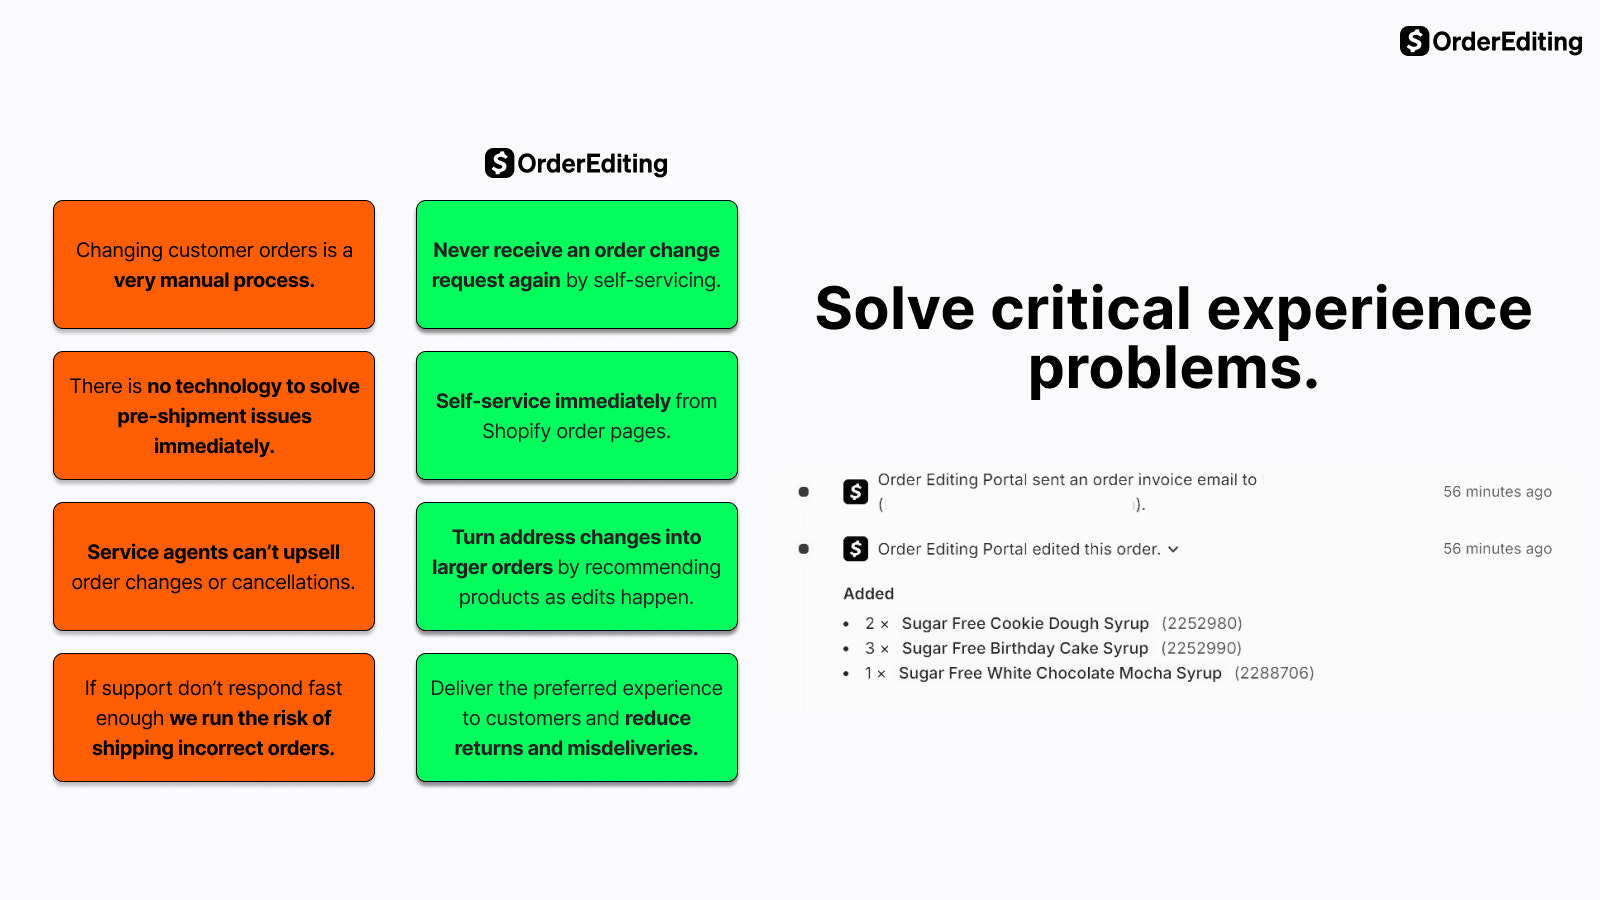 Solve critical experience problems